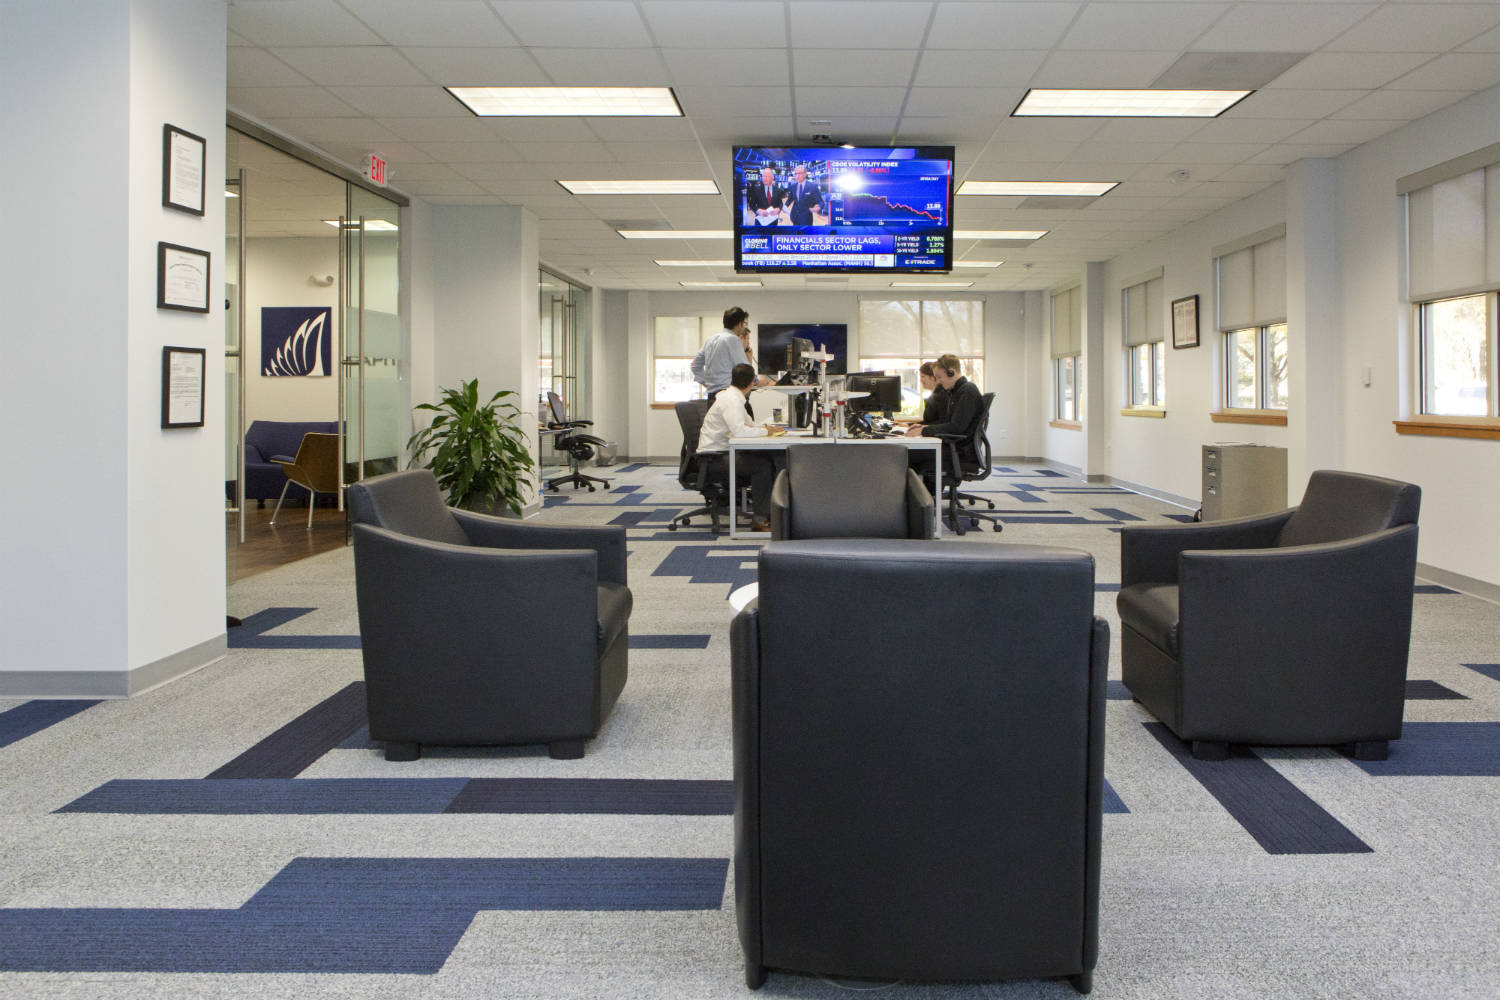 Falcon Square Capital in Raleigh, NC - Internal Room Acoustics and Isolation by WSDG - Main Common Space